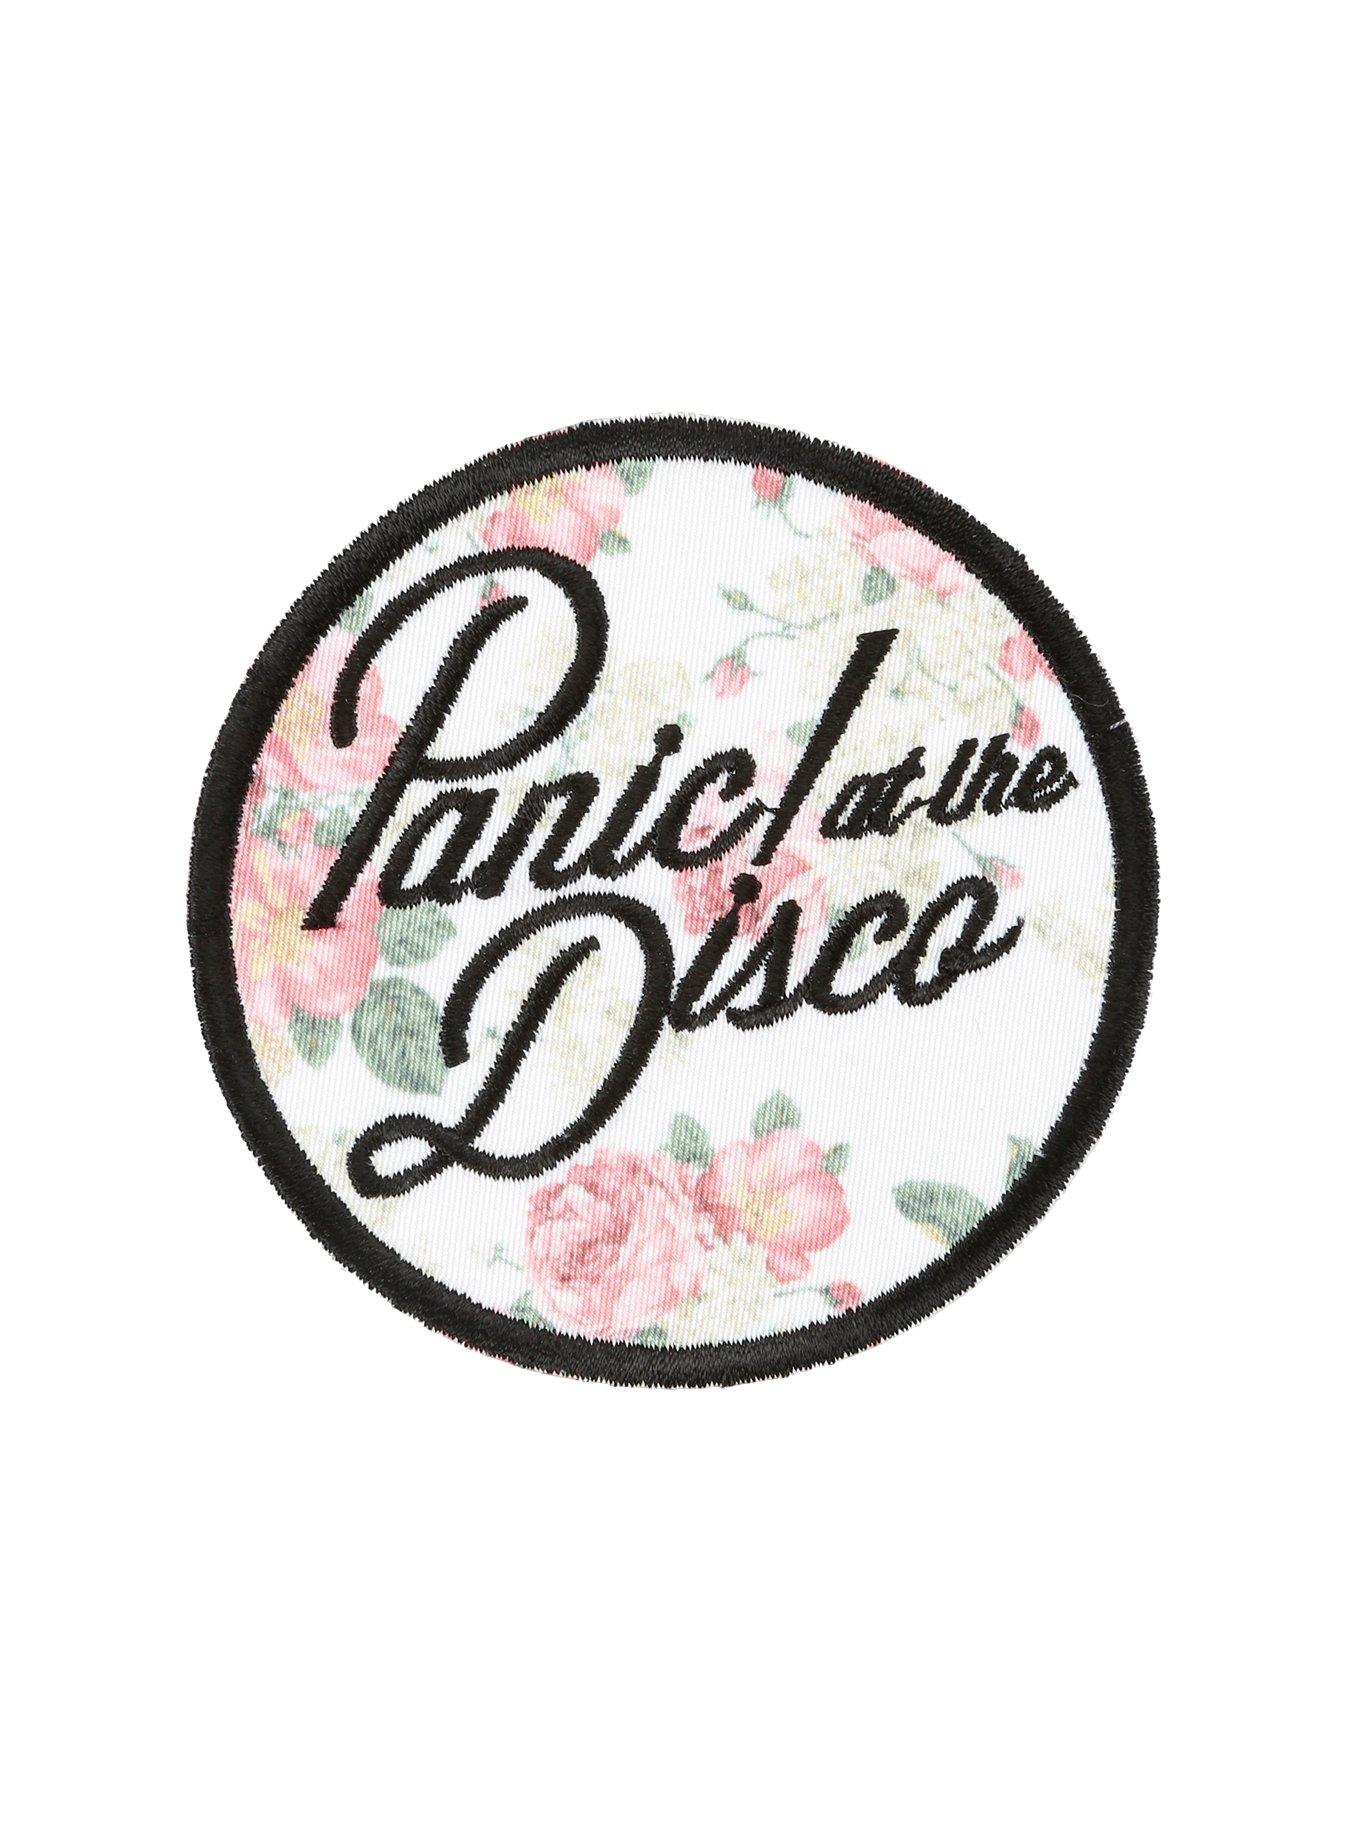 Panic! At The Disco Floral Patch - Deactivated by Sierra 1/30 New Sample Needed, , hi-res